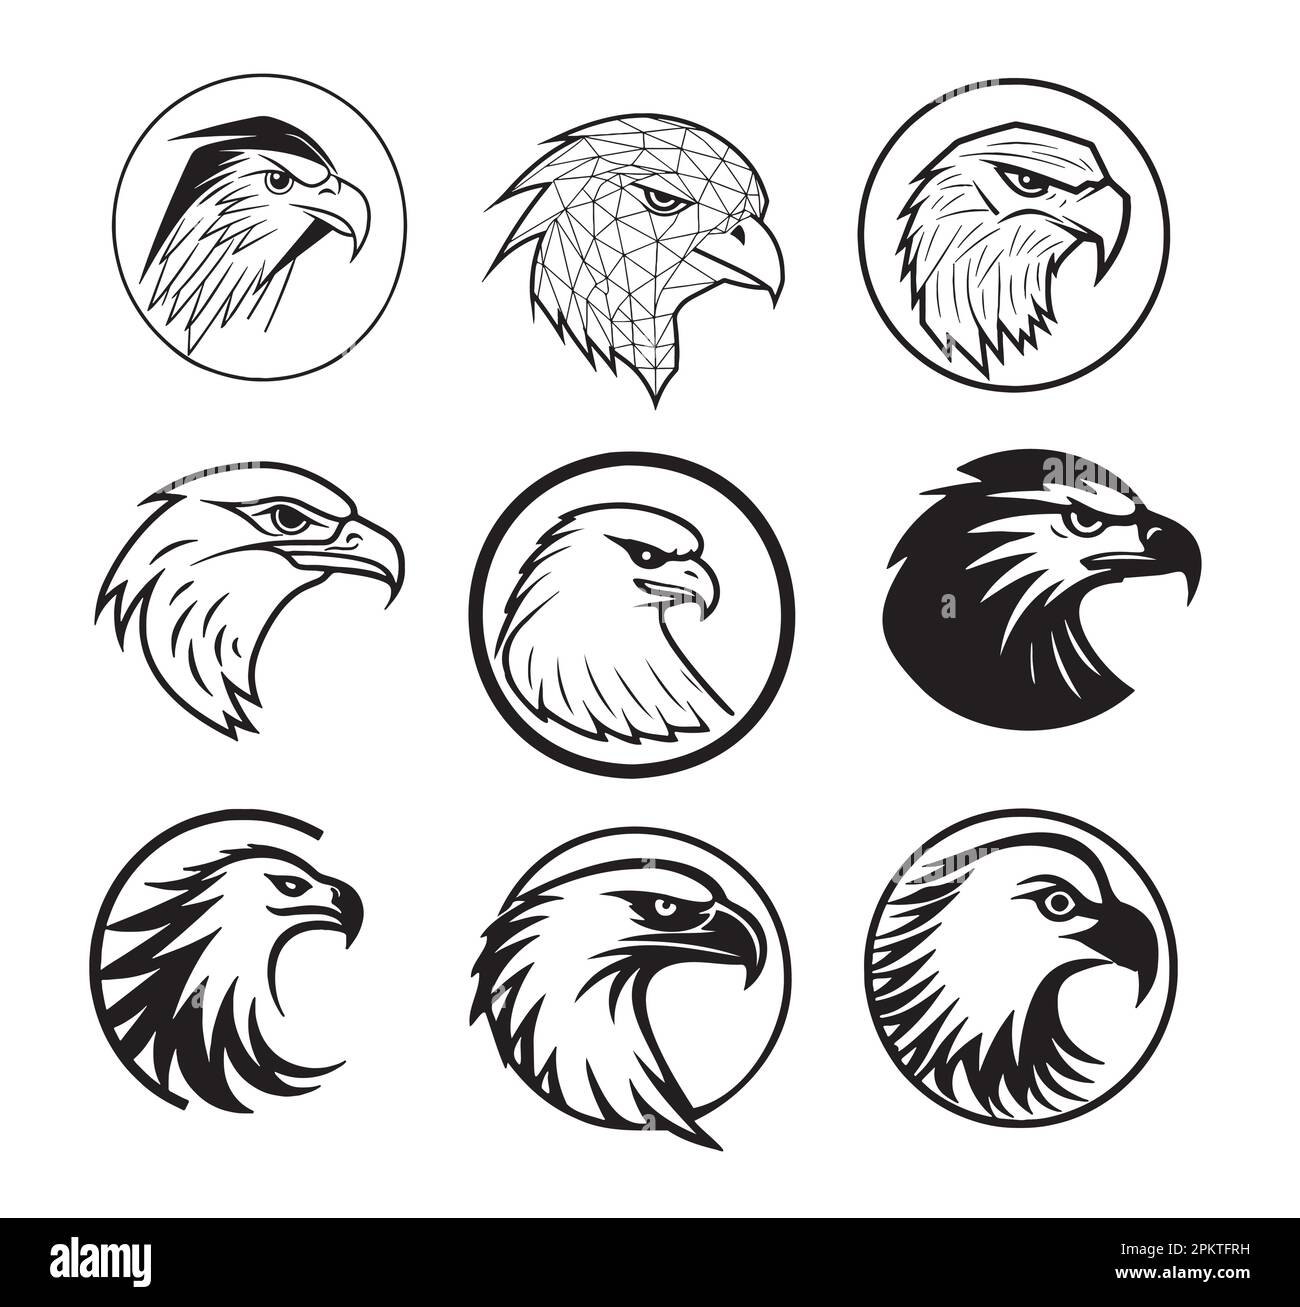 Eagle head logo sketch hand drawn in doodle style illustration Stock Vector